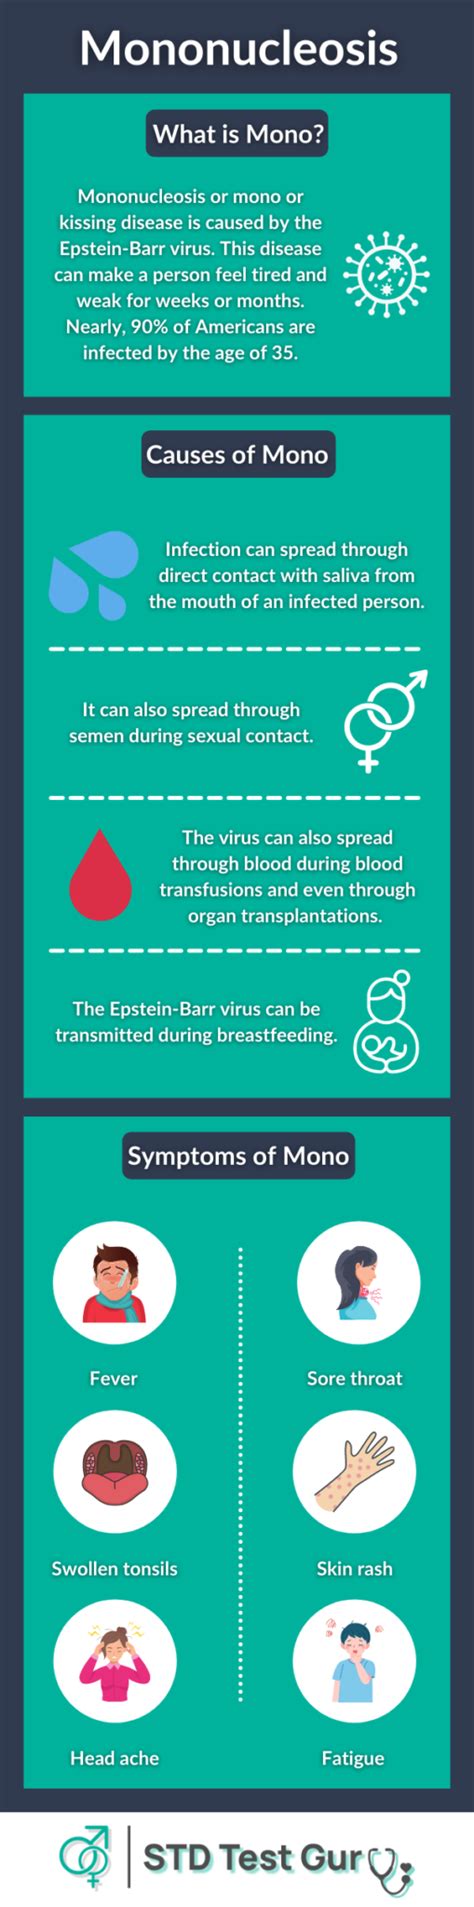 What Is Mononucleosis Causes Symptoms Testing And Treatment